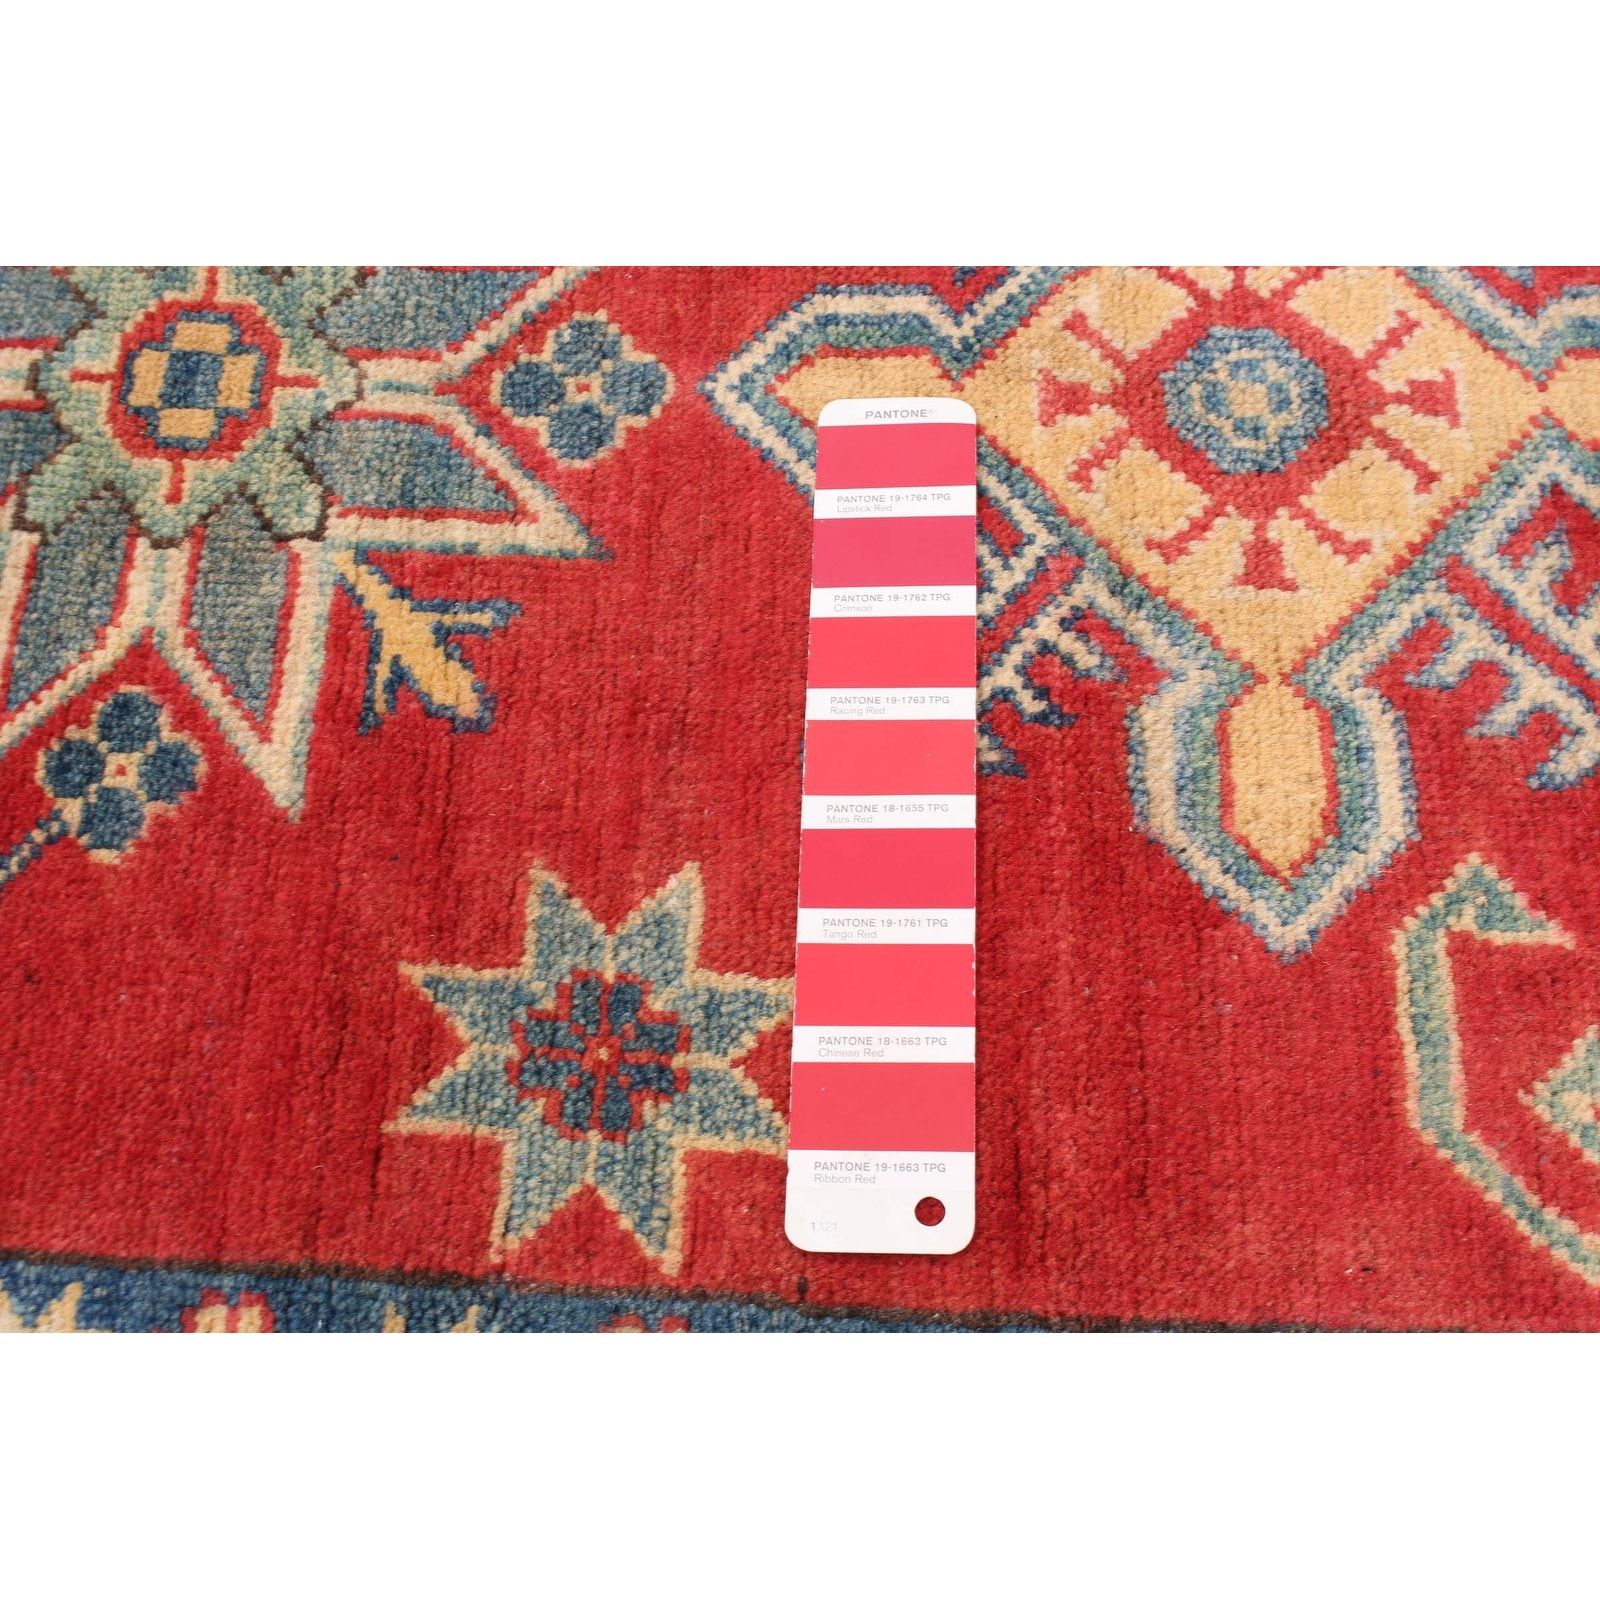 Bedroom Finest Ghazni Bordered Red Rug 9'0 x 13'3 eCarpet Gallery Large Area Rug for Living Room 363493 Hand-Knotted Wool Rug 